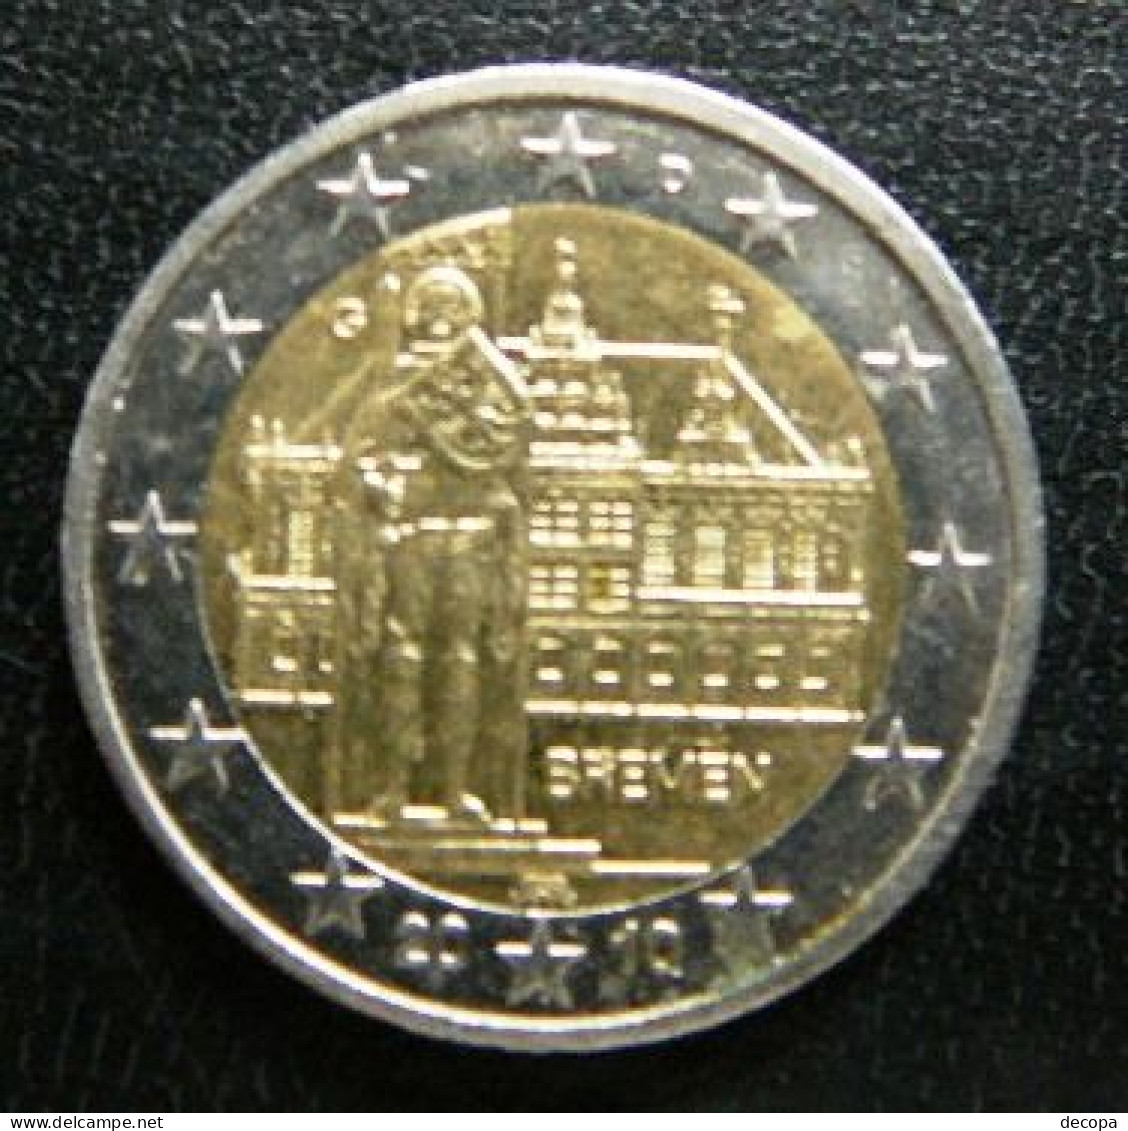 Germany - Allemagne - Duitsland   2 EURO 2010 G   Speciale Uitgave - Commemorative - Germania